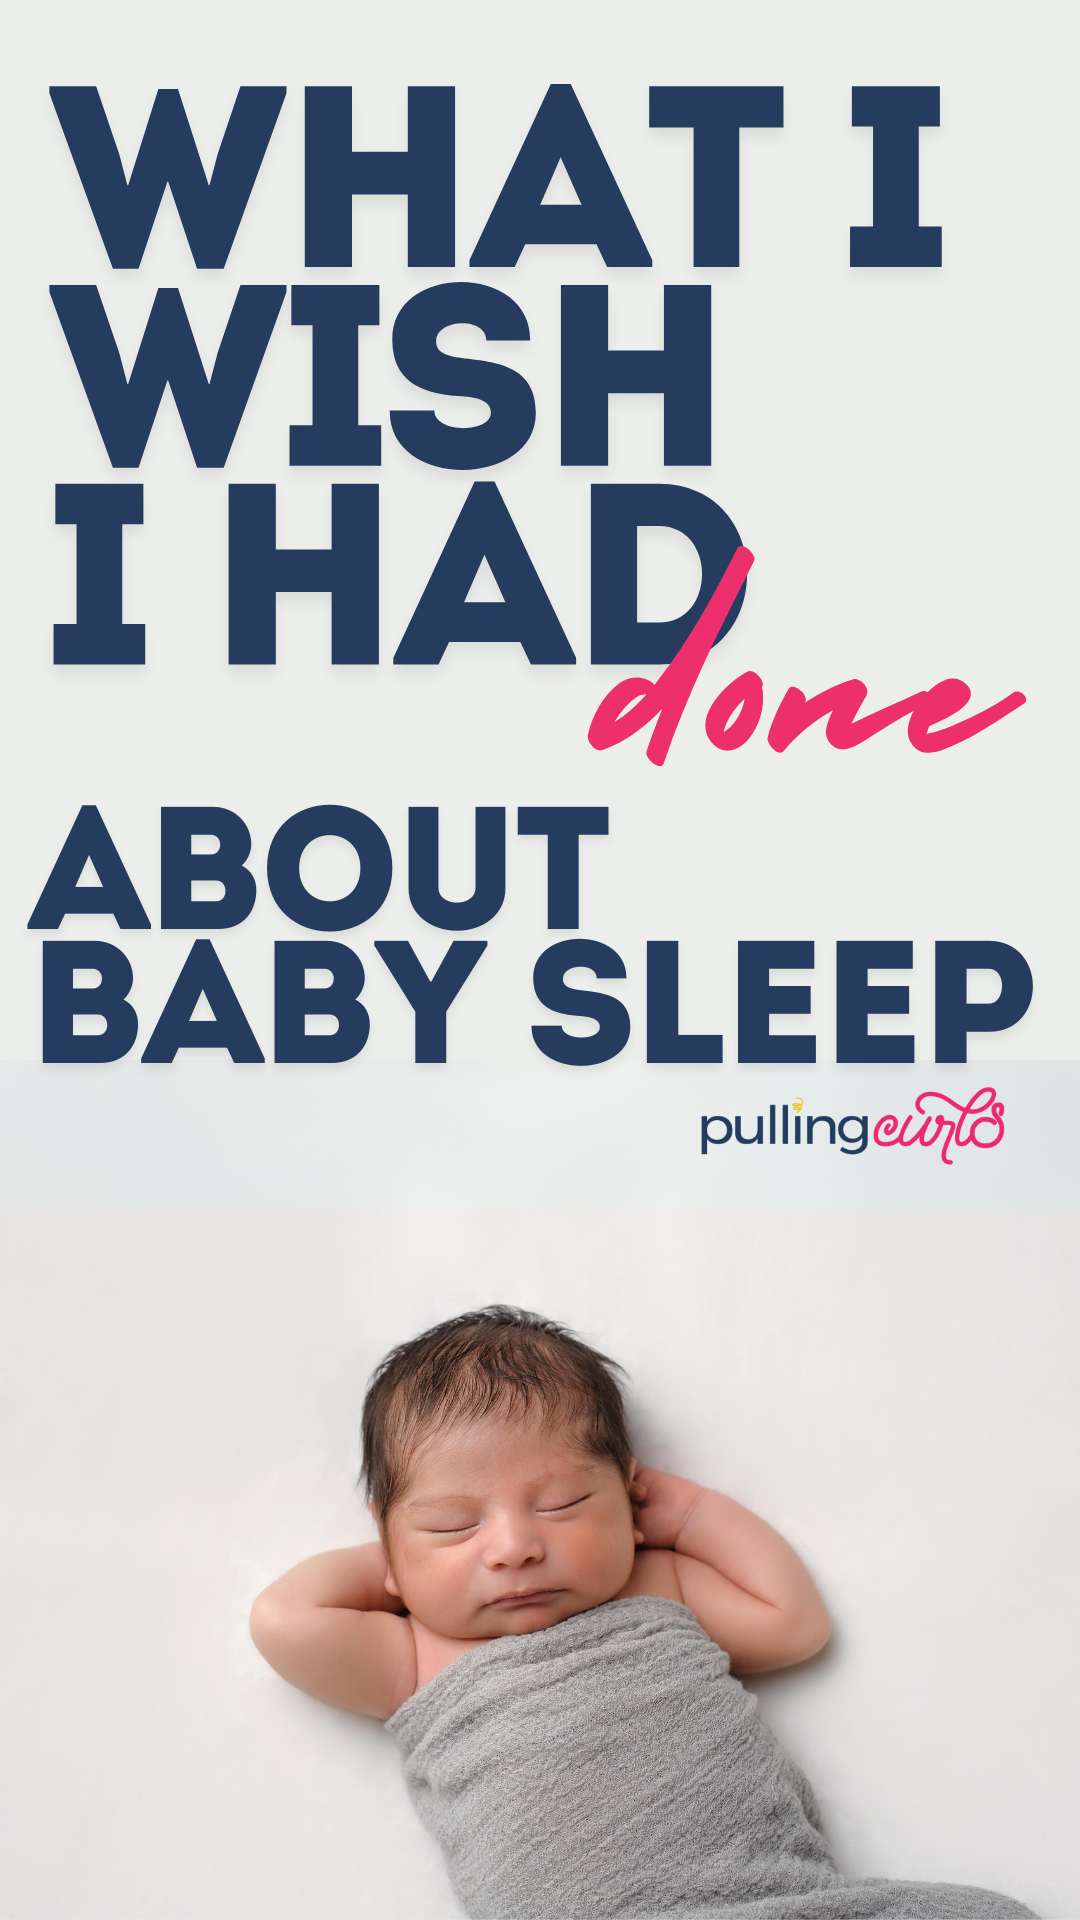 After having three children, I've learned a thing or two about baby sleep. I wished I knew these when I was a new mom. From feeding routines to dropping the ball around you, discover 5 things I wish I'd done to help my baby sleep better. via @pullingcurls